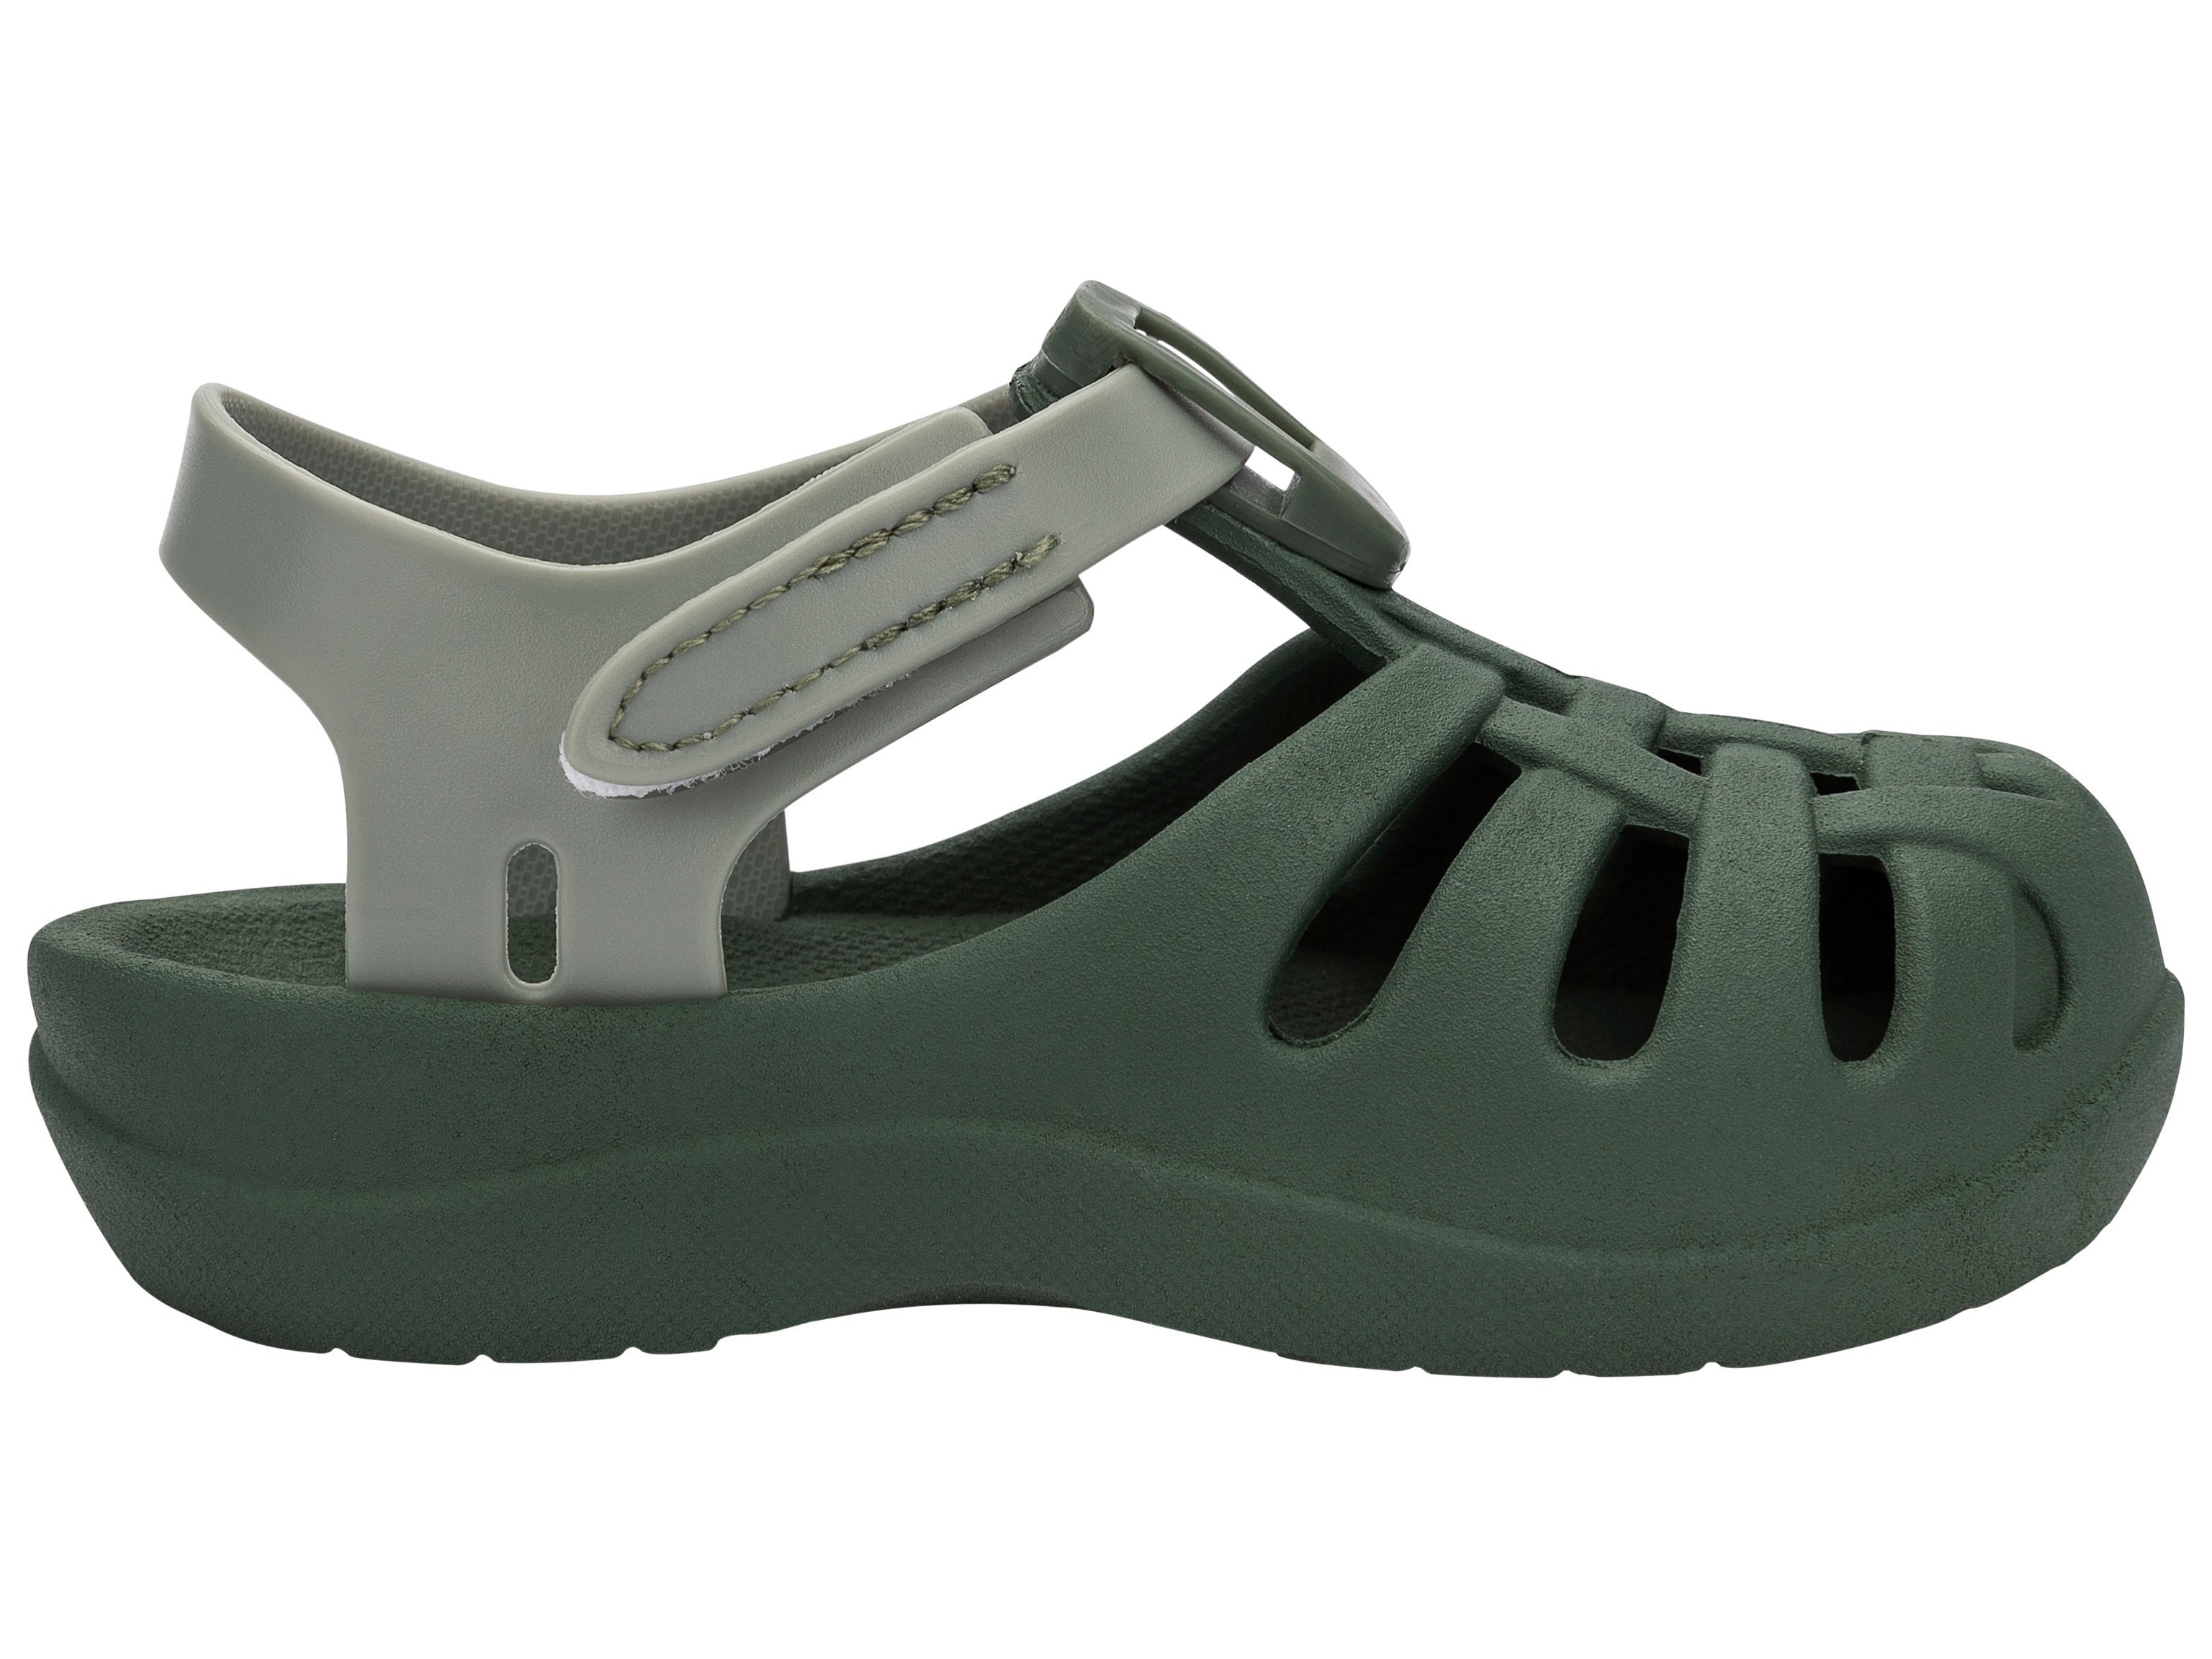 Outer side view of a green Ipanema Summer Basic baby sandal.